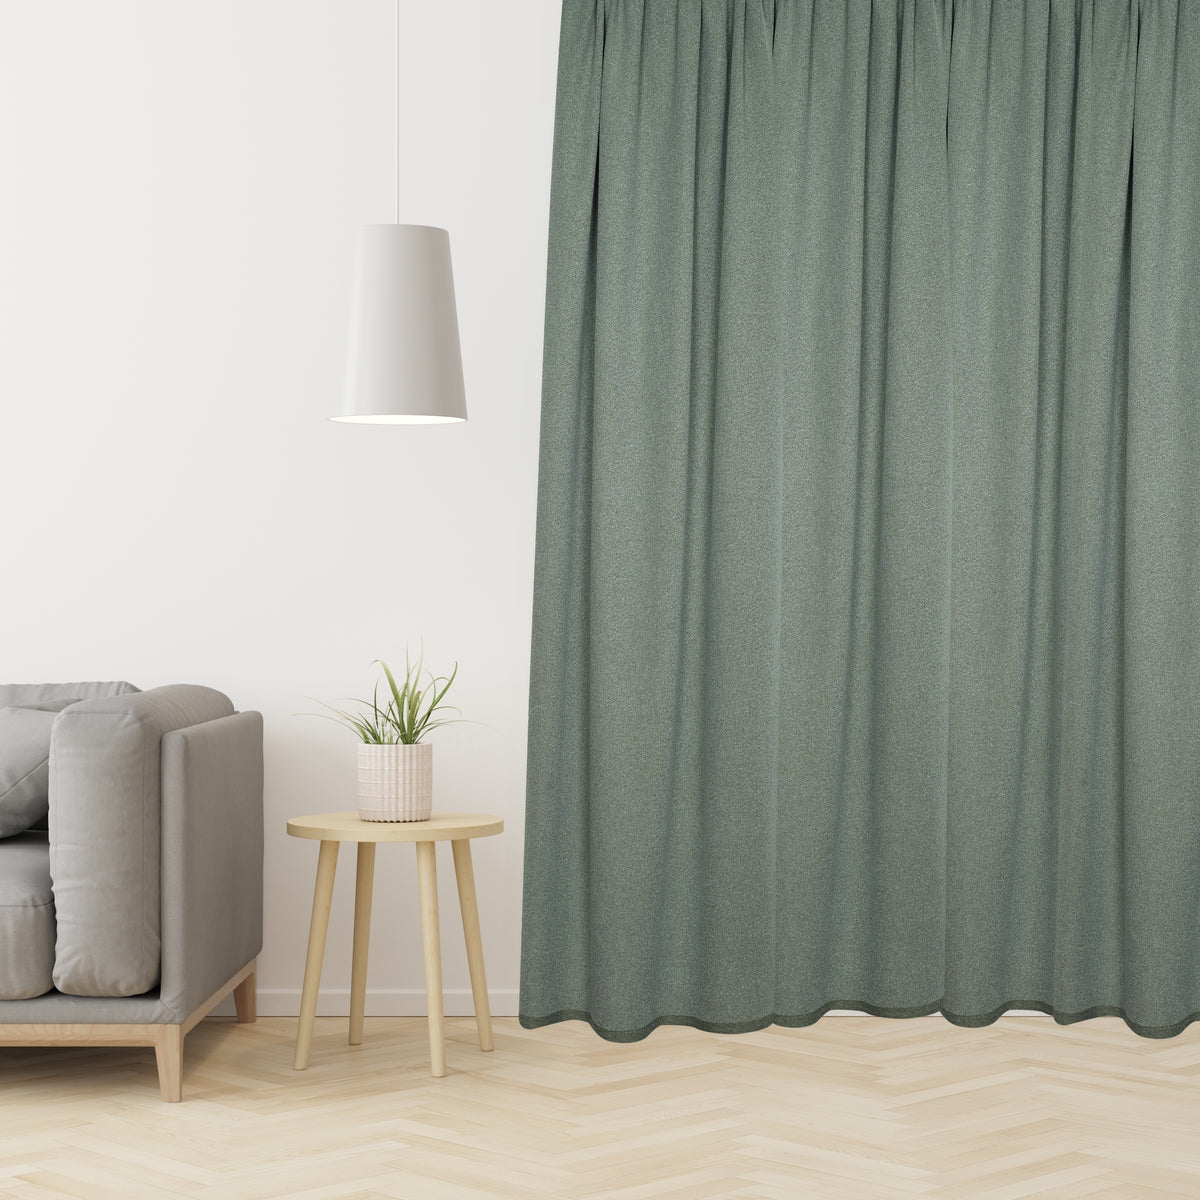 Night curtain without blackout light moss green Cobble